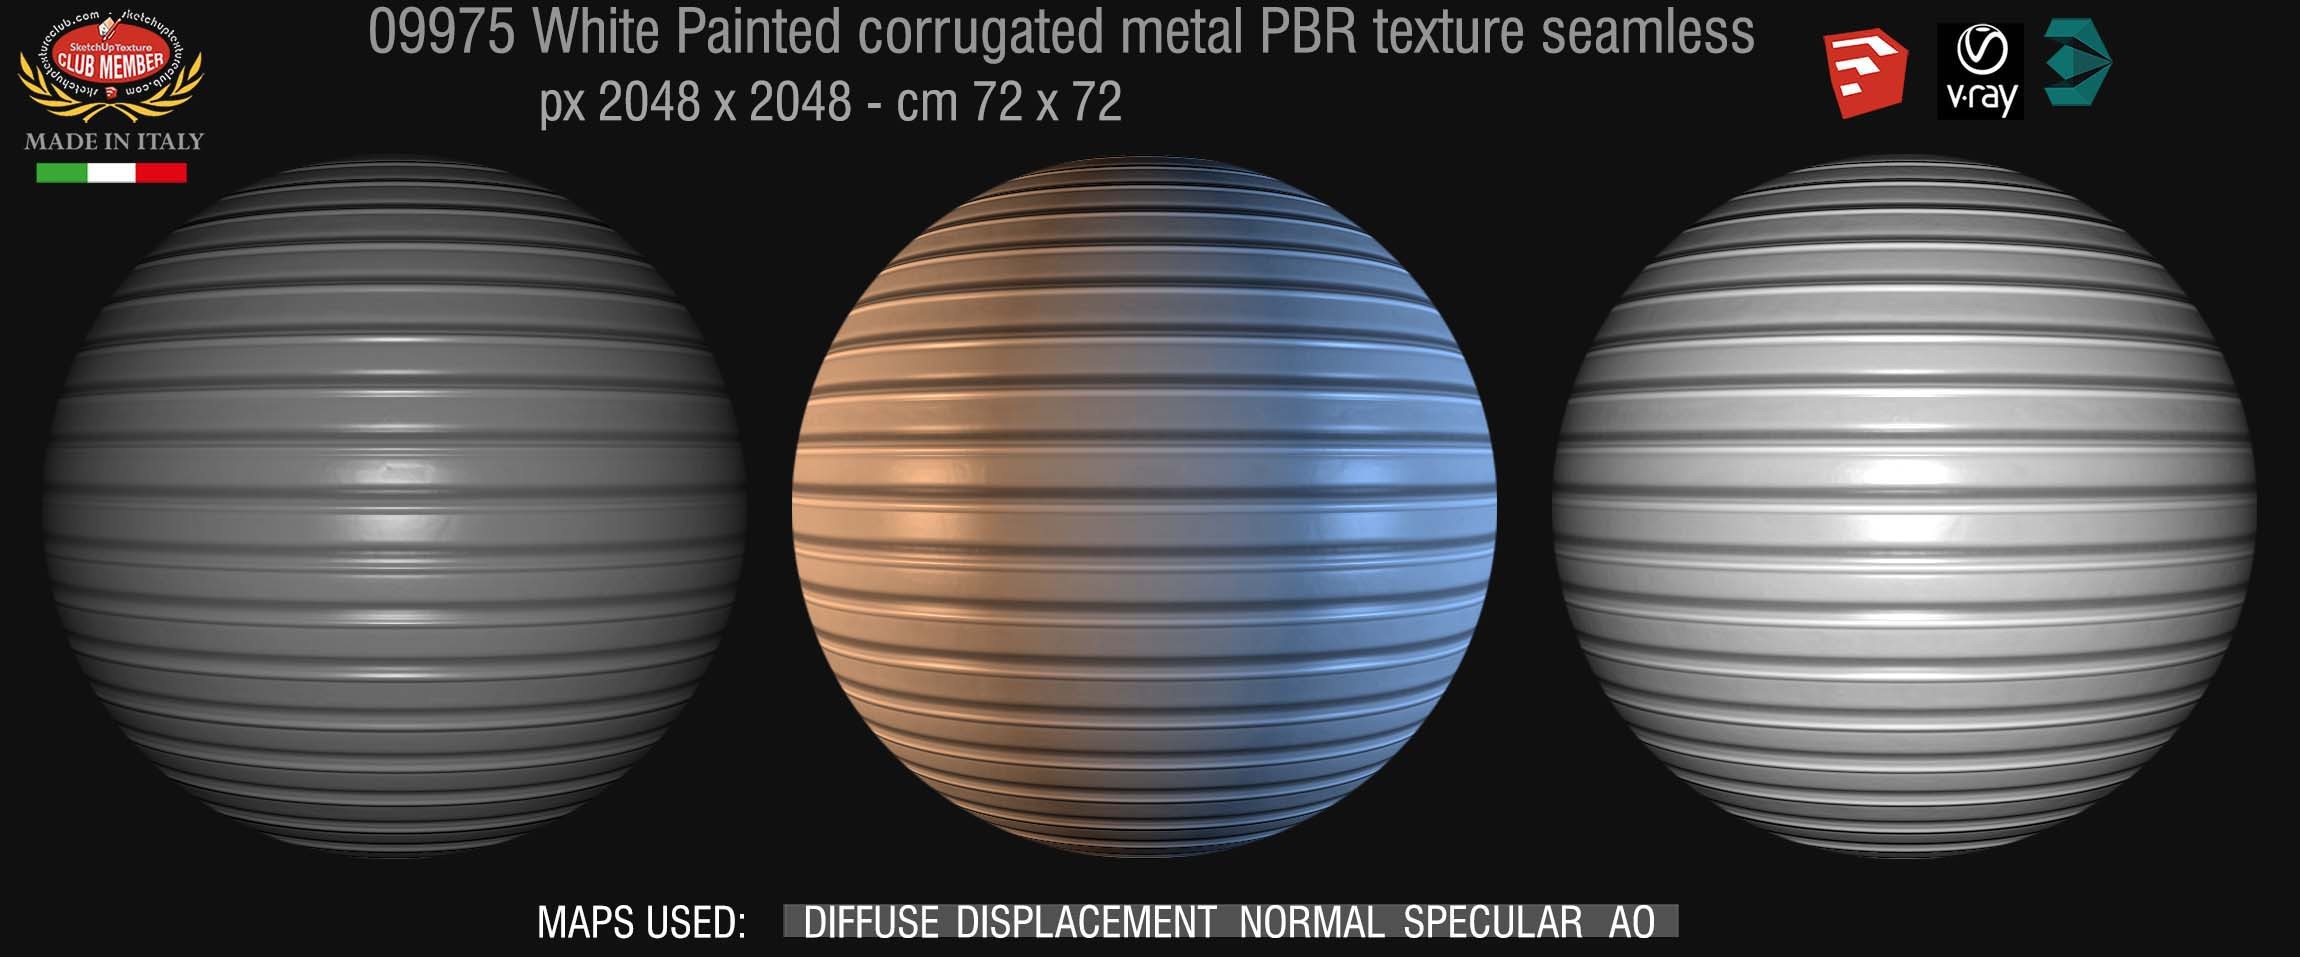 09975 White painted corrugated metal PBR texture seamless DEMO